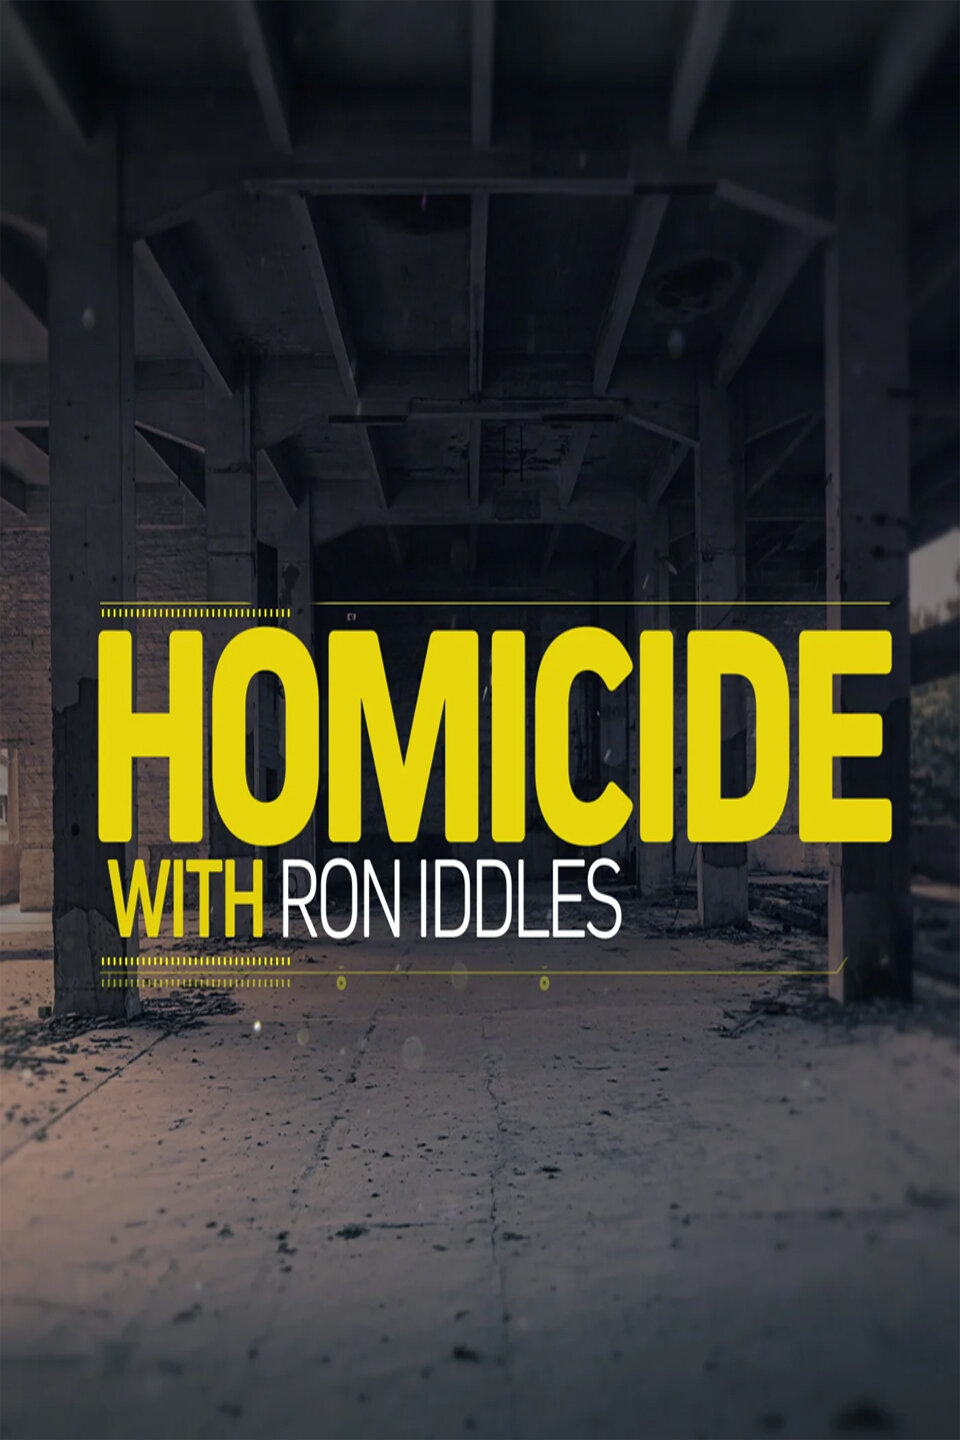 Homicide with Ron Iddles ne zaman